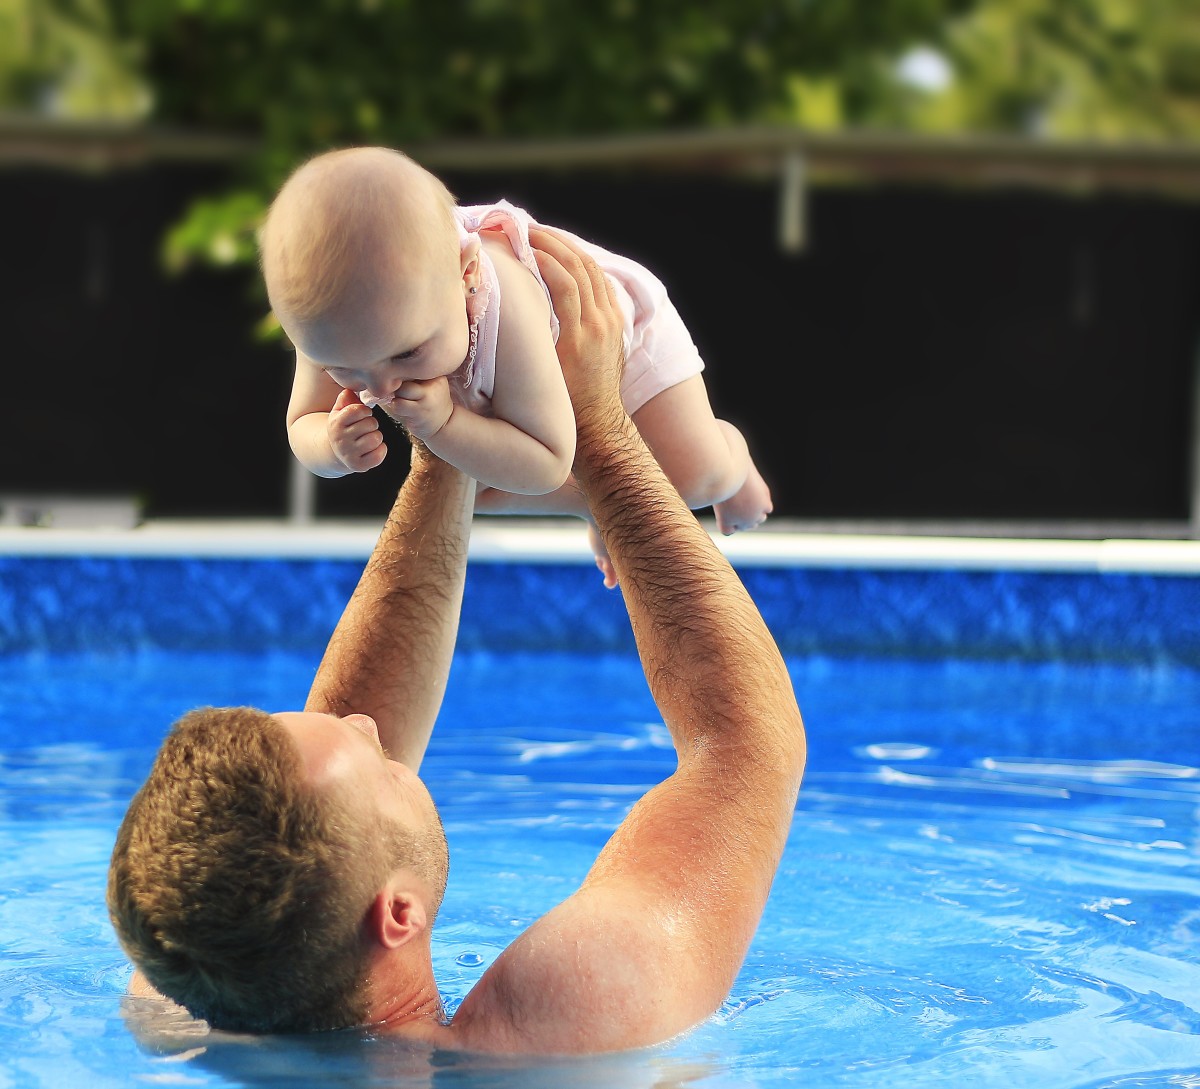 Keeping a pool as safe as possible is important for everyone.